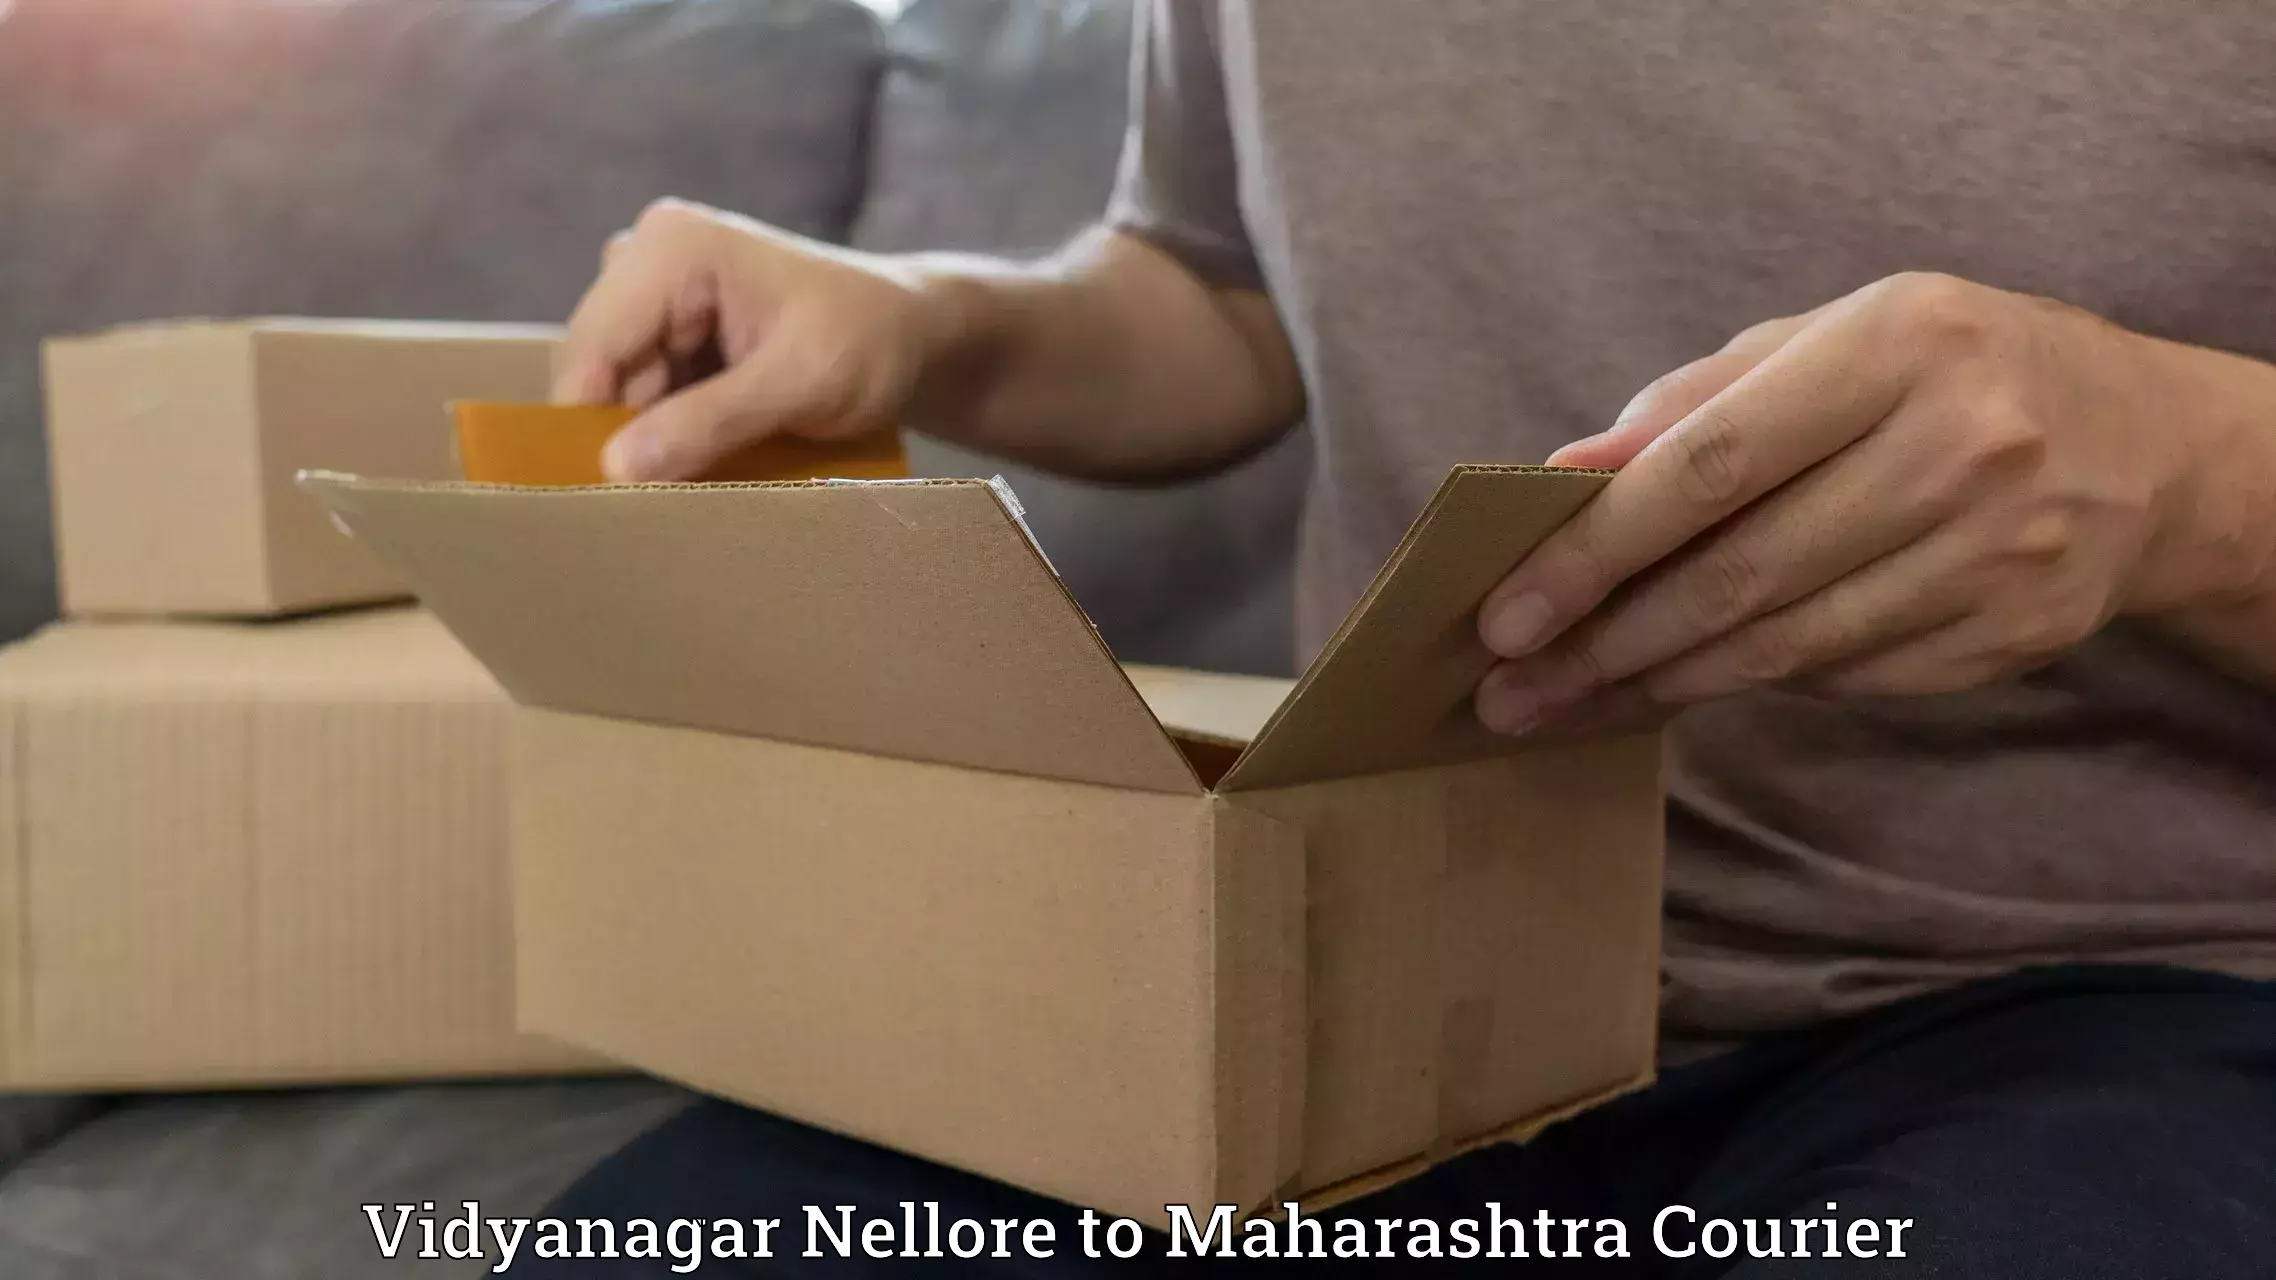 Package delivery network Vidyanagar Nellore to Sillod